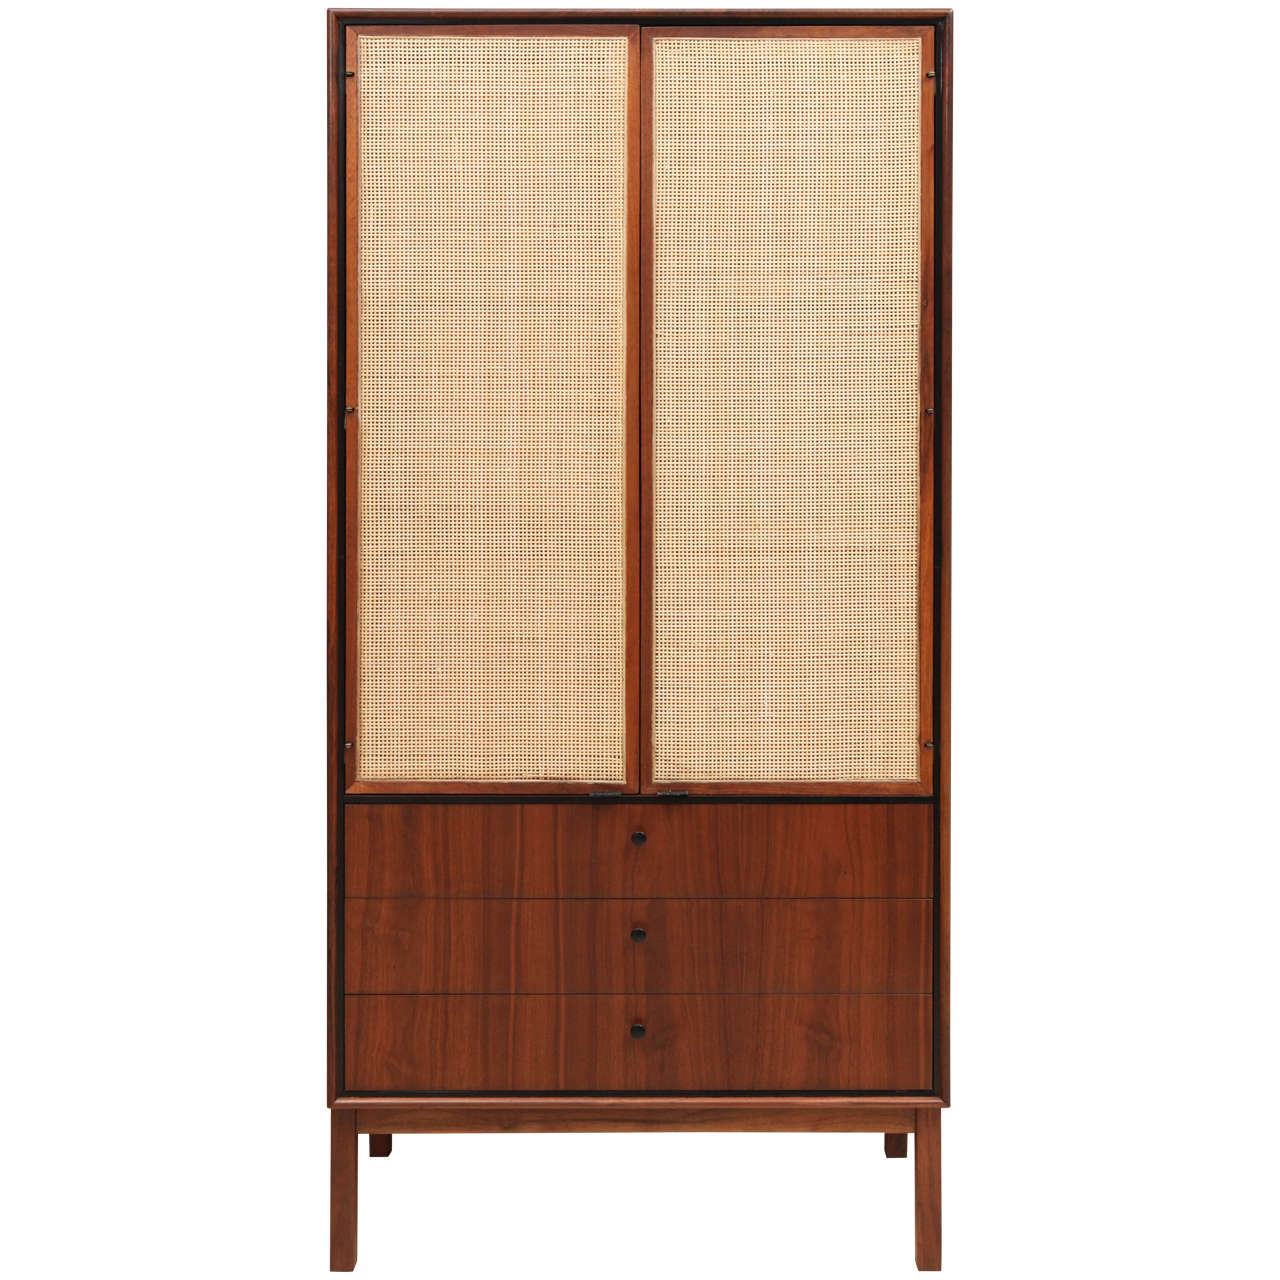 Tall Walnut and Cane Cabinet with Drawers at Bottom